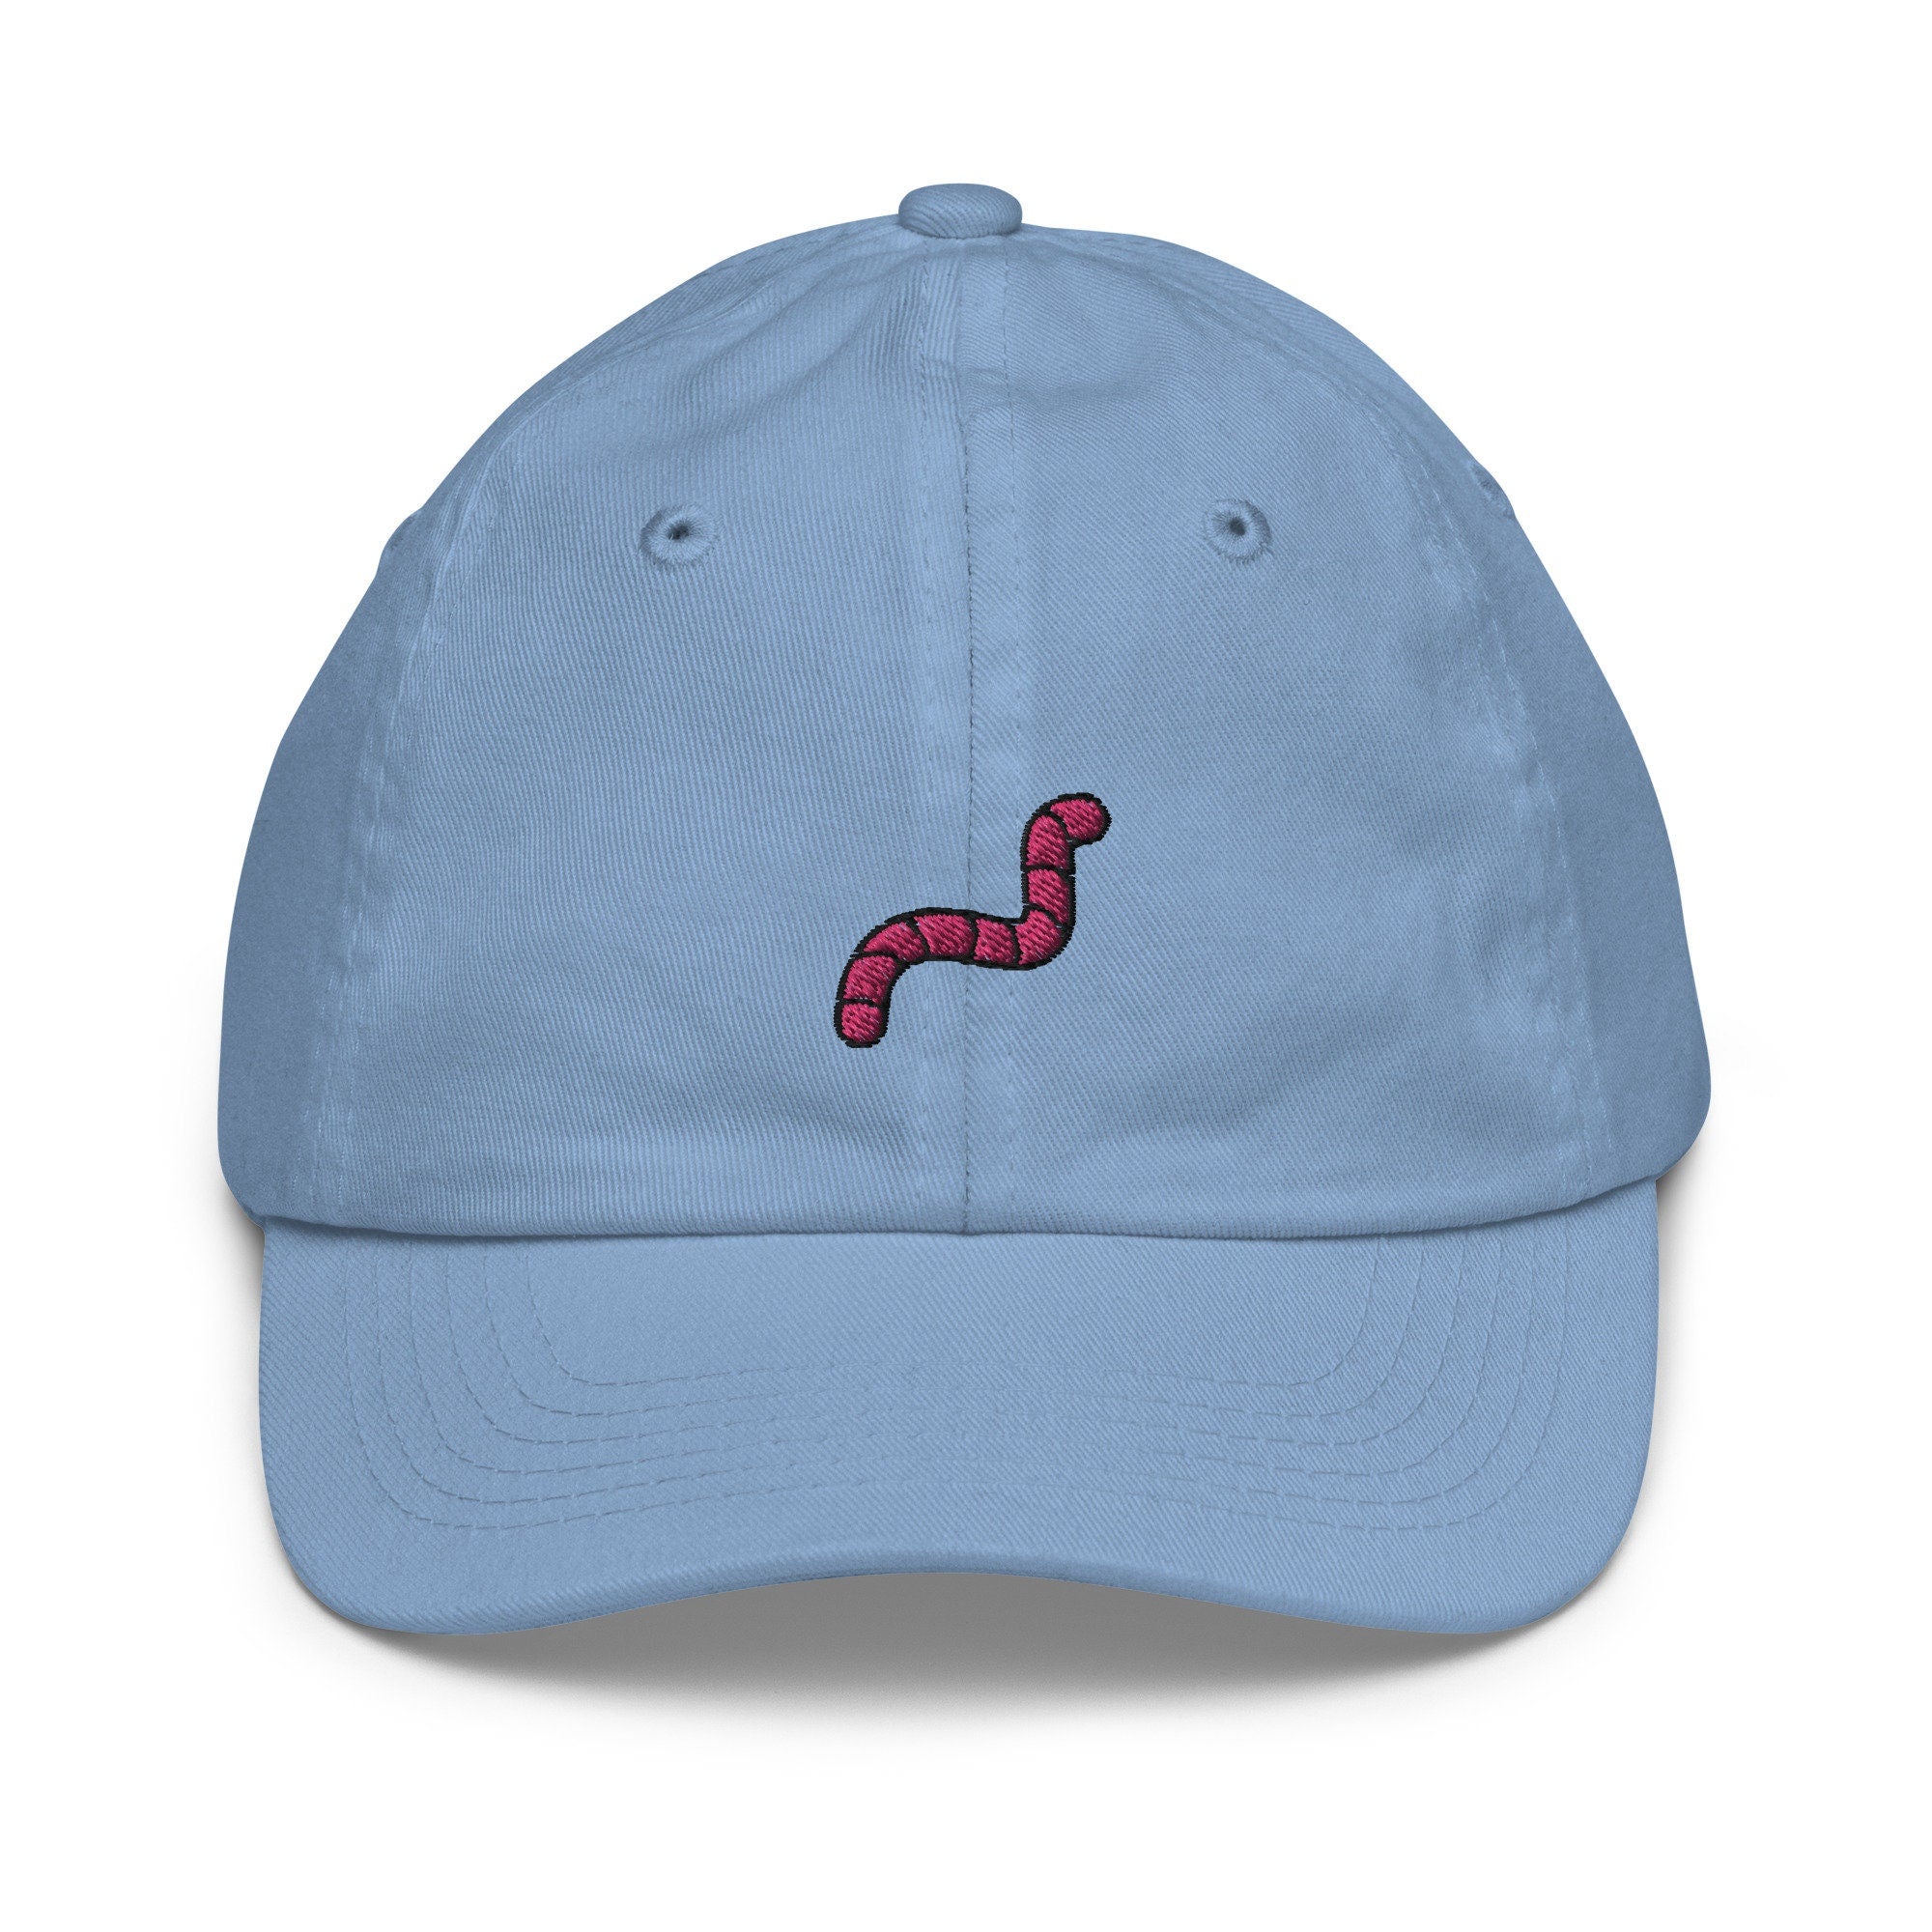 Worm Youth Baseball Cap, Handmade Kids Hat, Embroidered Childrens Hat Gift - Multiple Colors